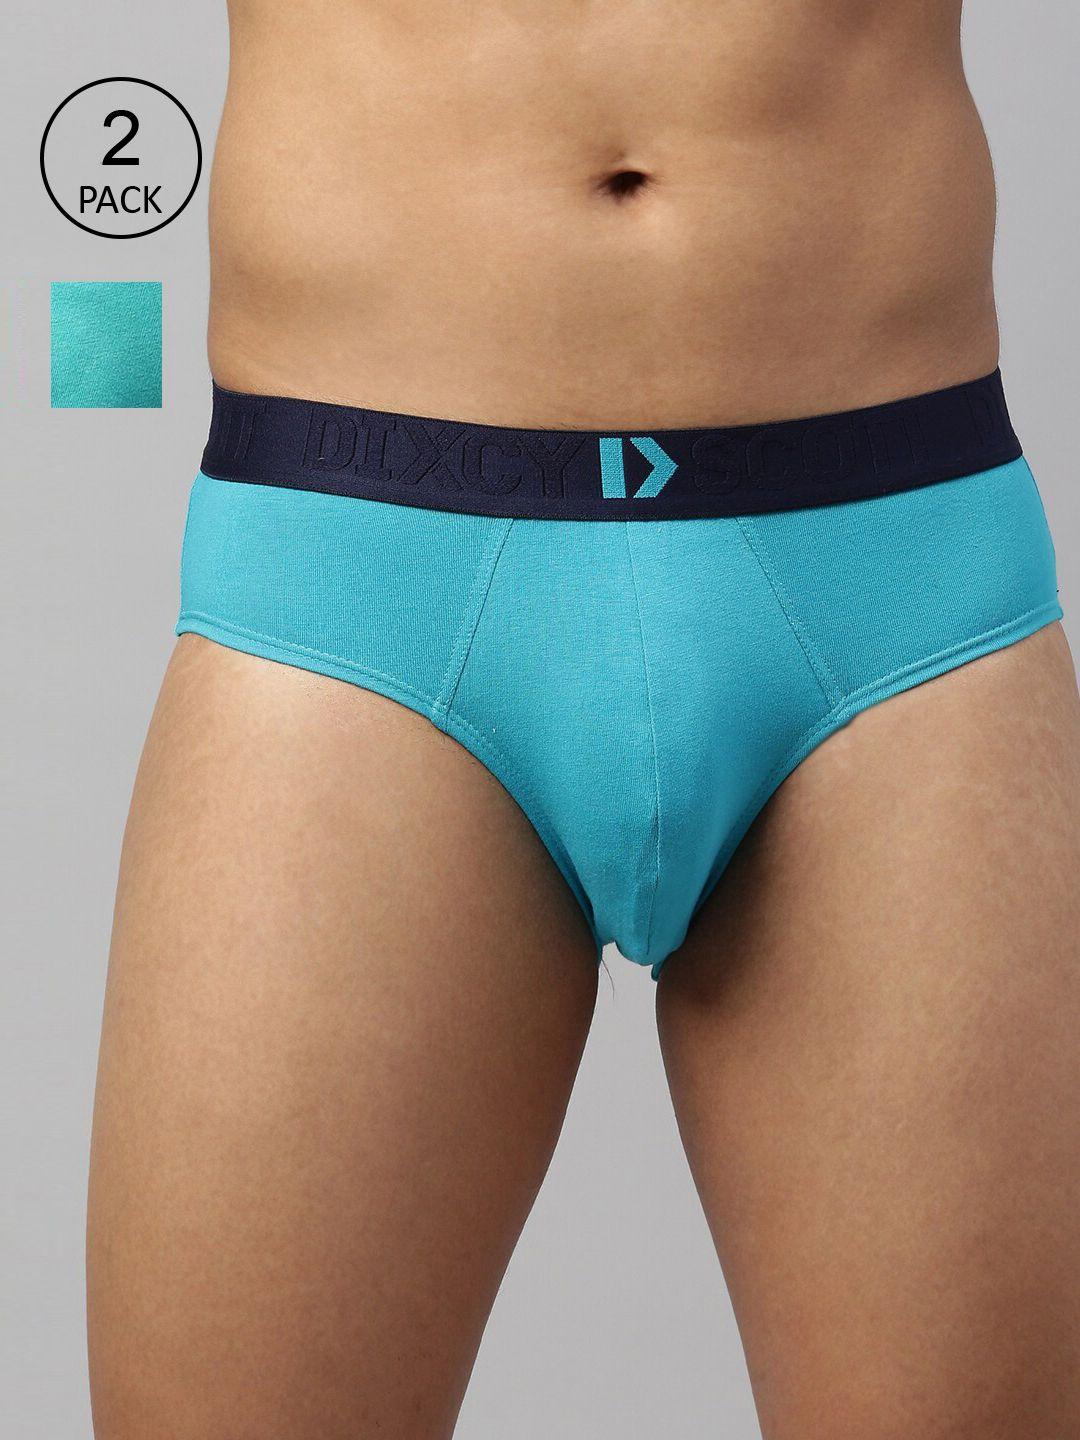 dixcy scott maximus men pack of 2 solid anti microbial basic briefs